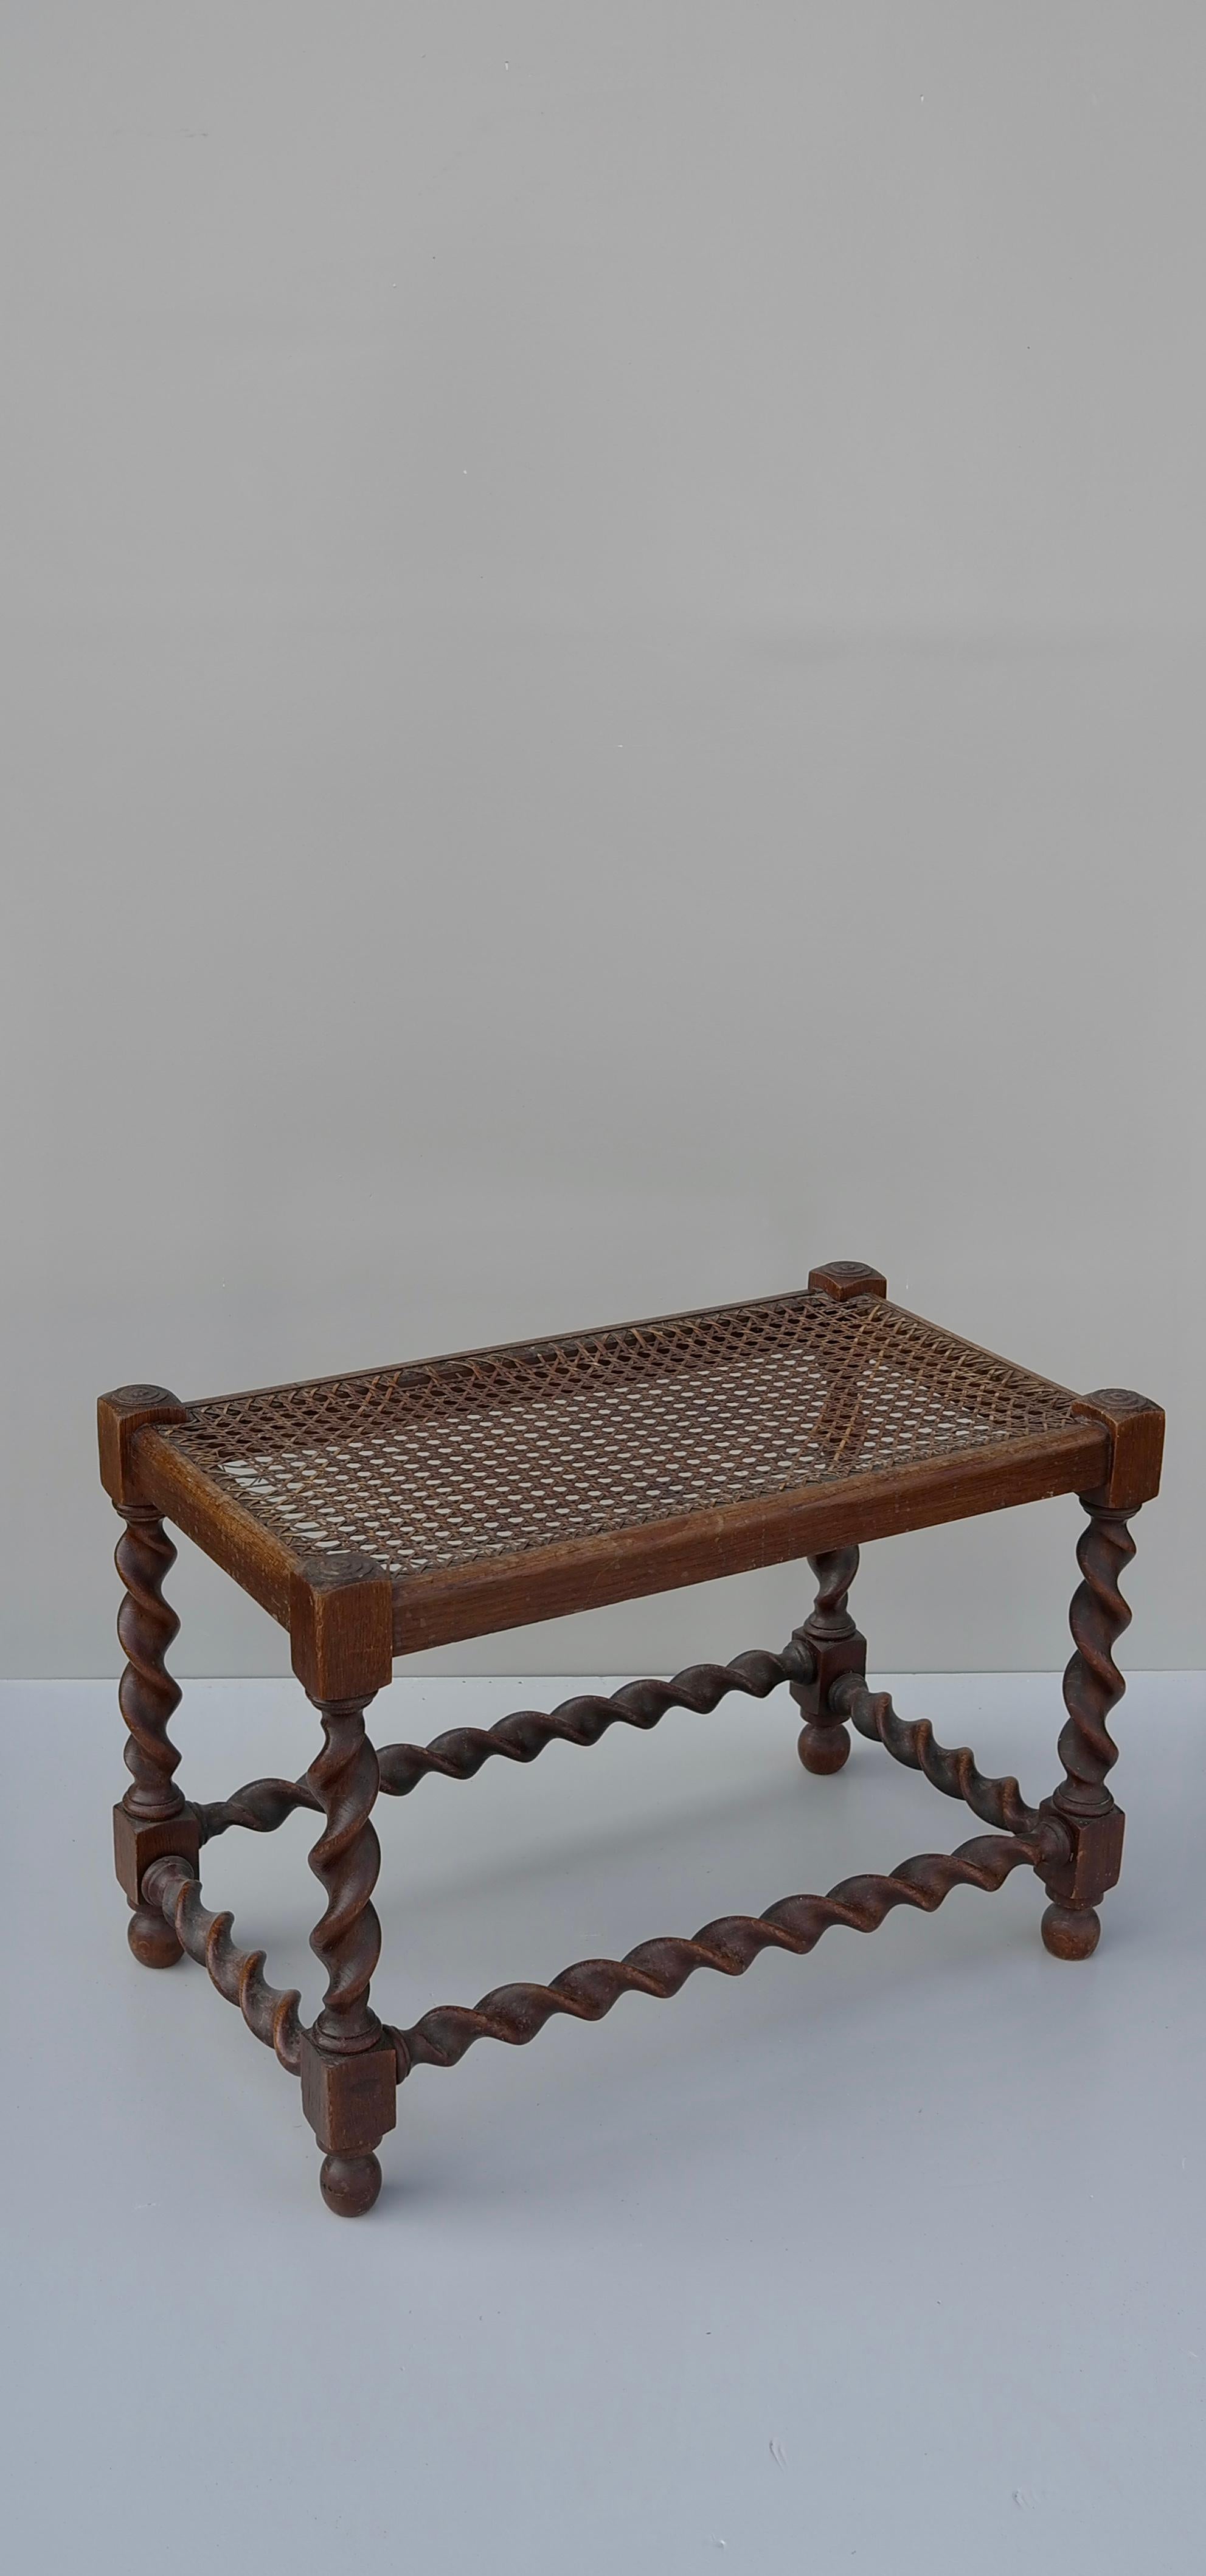 Dark Wooden Bench or Side Table with Cane Seat, France, 1930's In Fair Condition For Sale In Den Haag, NL